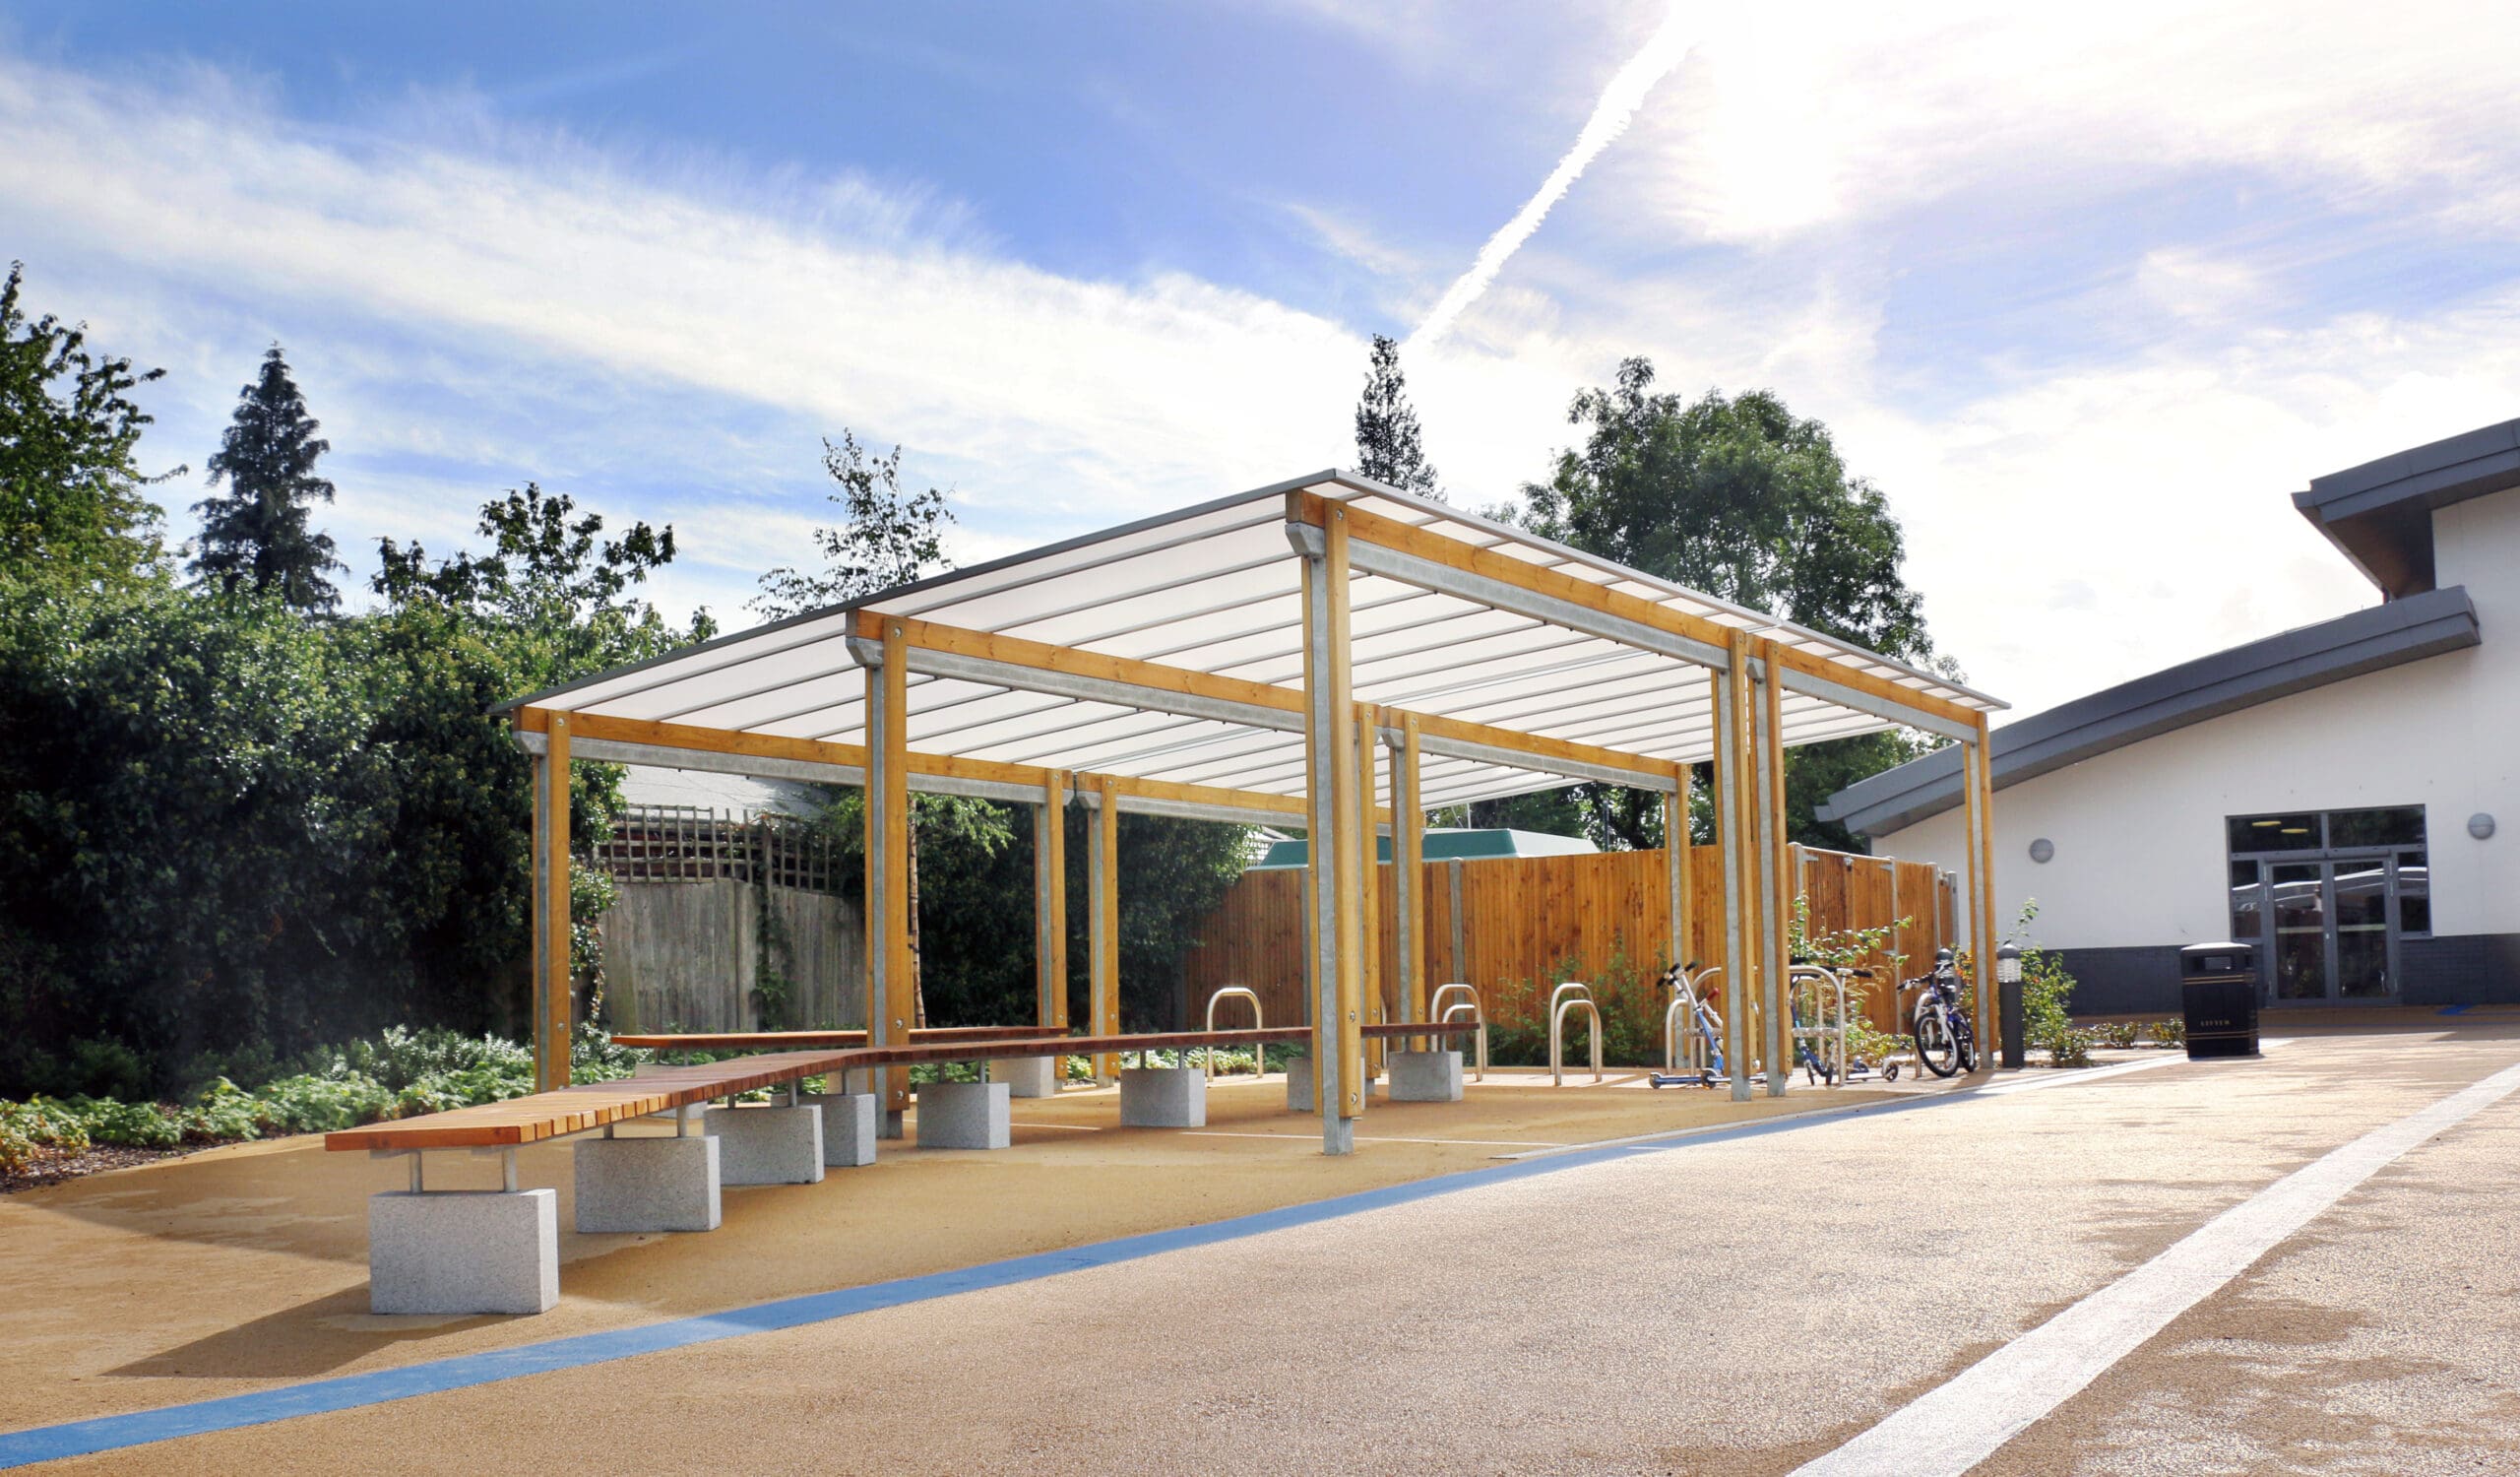 Large pergola with canopy covering bicycle and scooter parking racks and wooden benches with concrete plinth legs